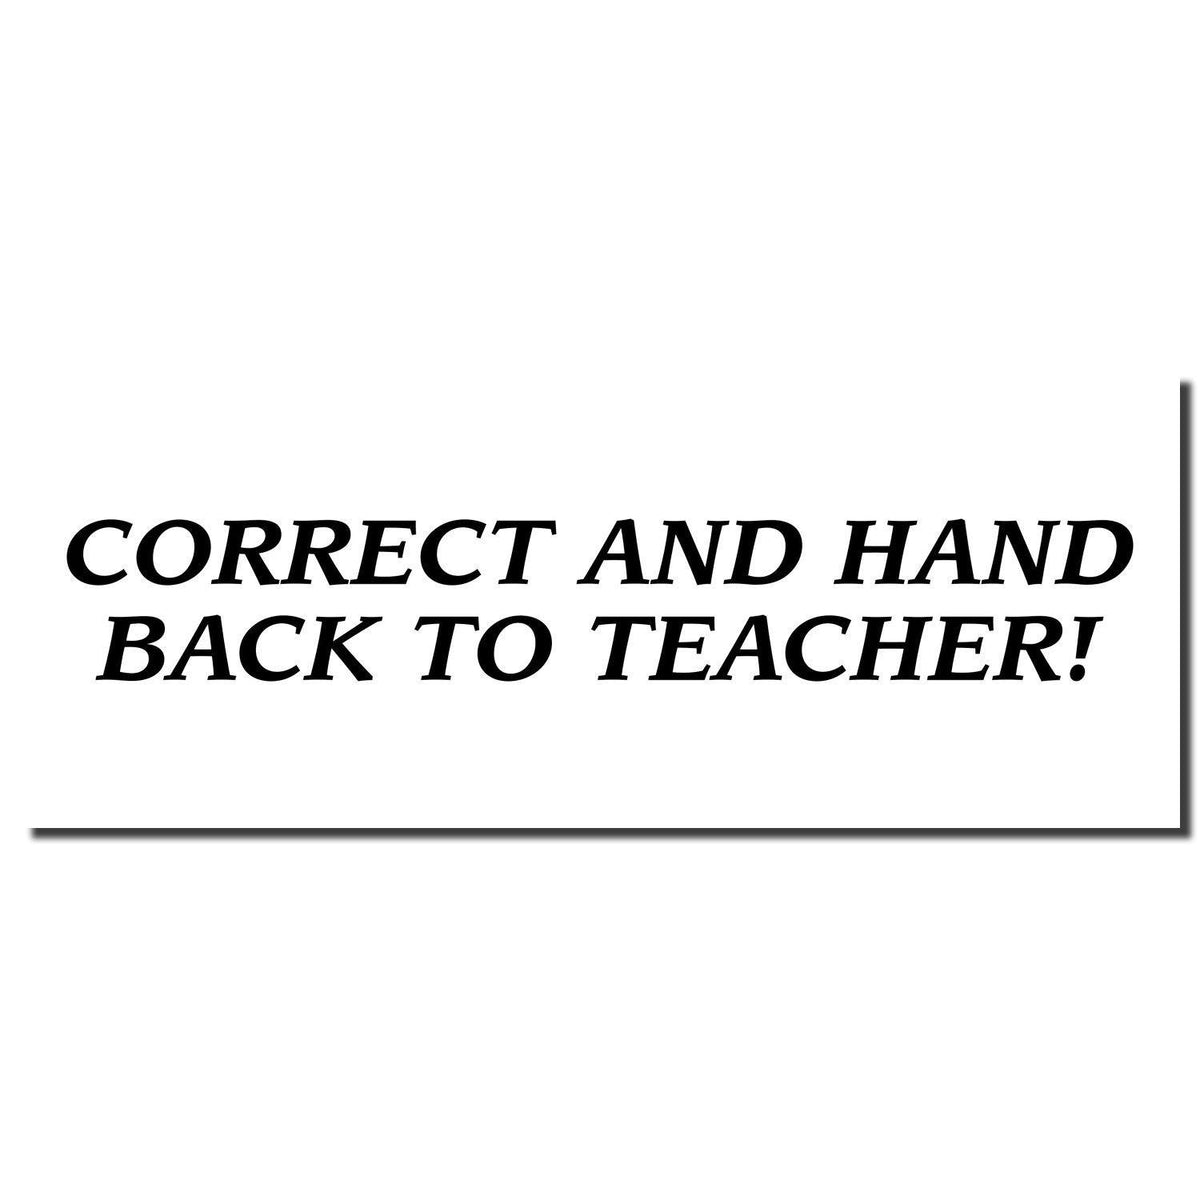 Enlarged Imprint Correct And Hand Back To Teacher Rubber Stamp Sample